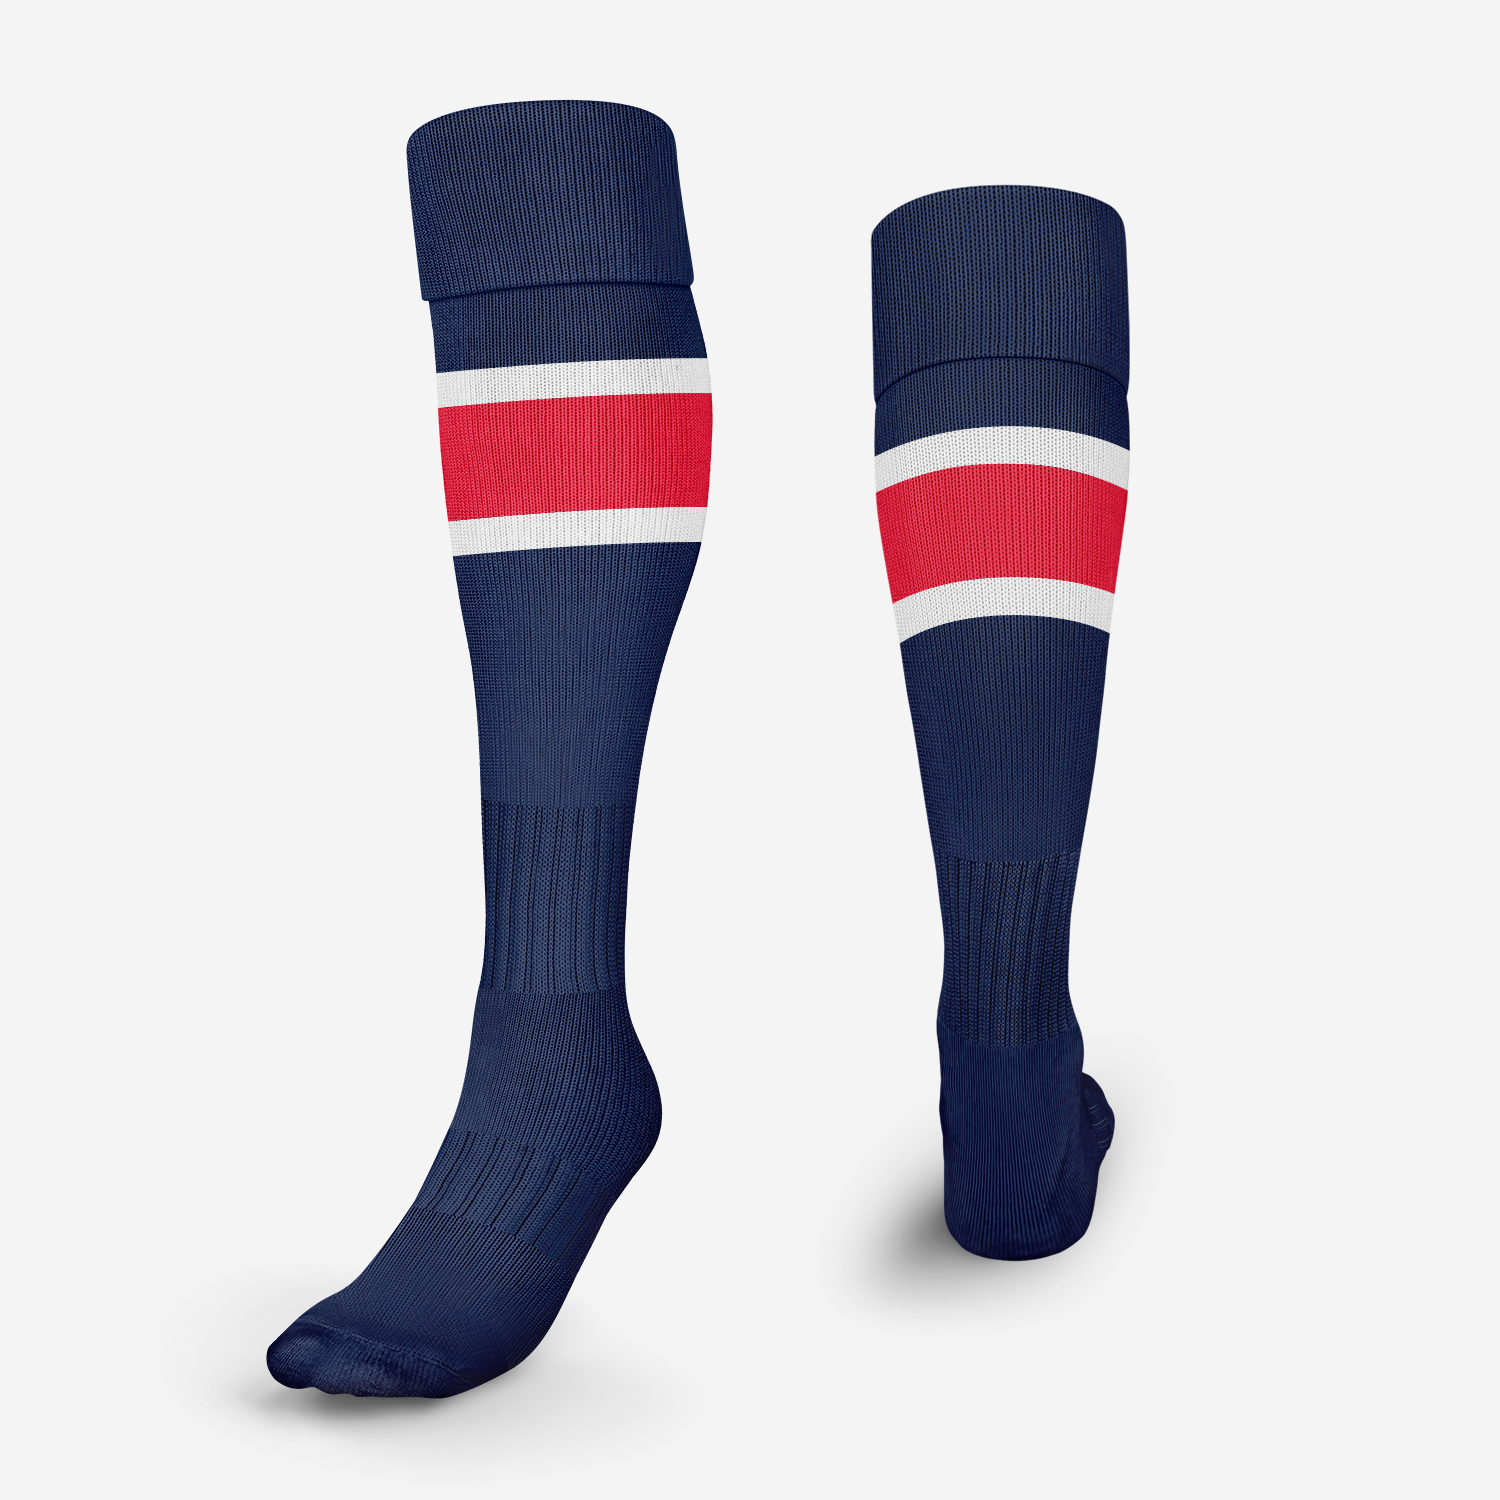 Sydney Roosters youth socks